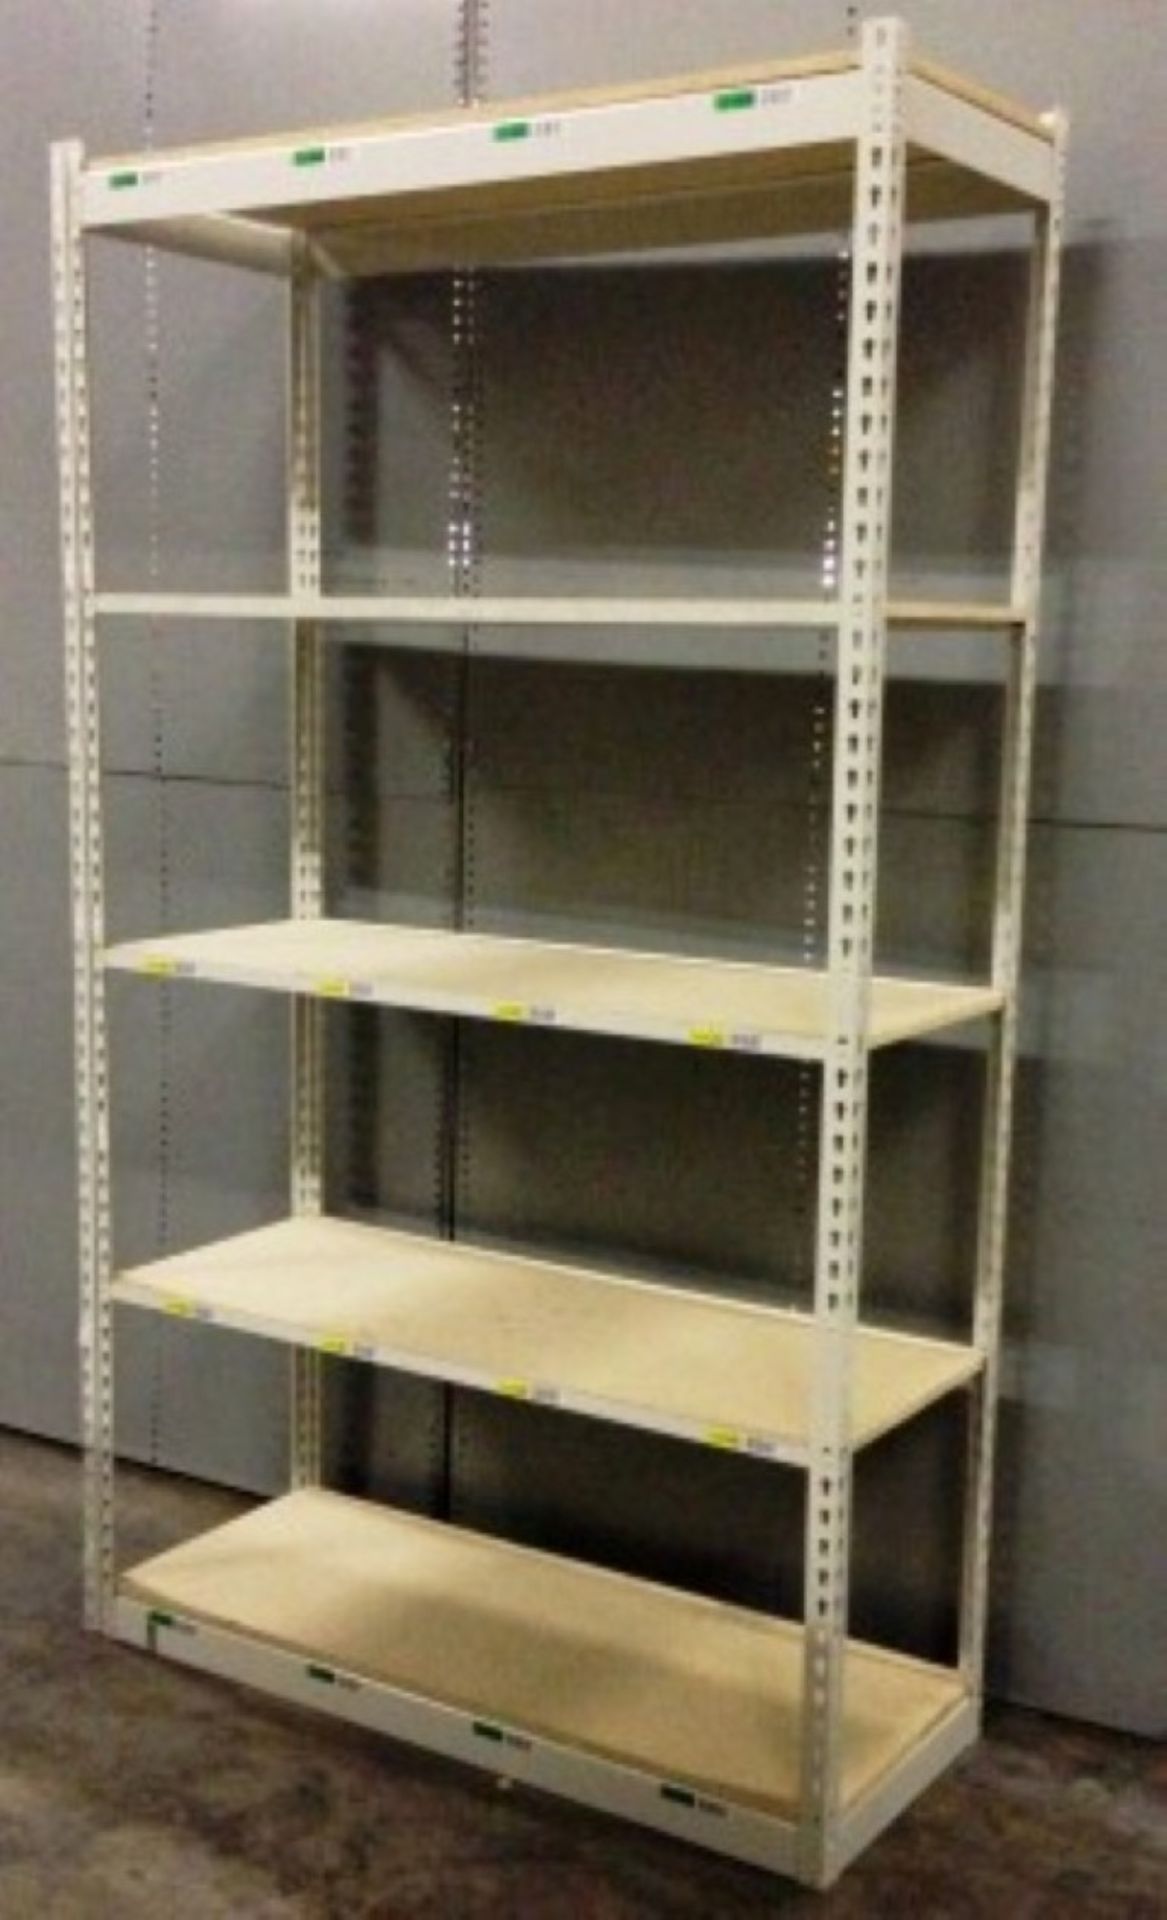 ONE LOT OF 10 SECTIONS OF RIVETIER INDUSTRIAL SHELVING - Image 2 of 2